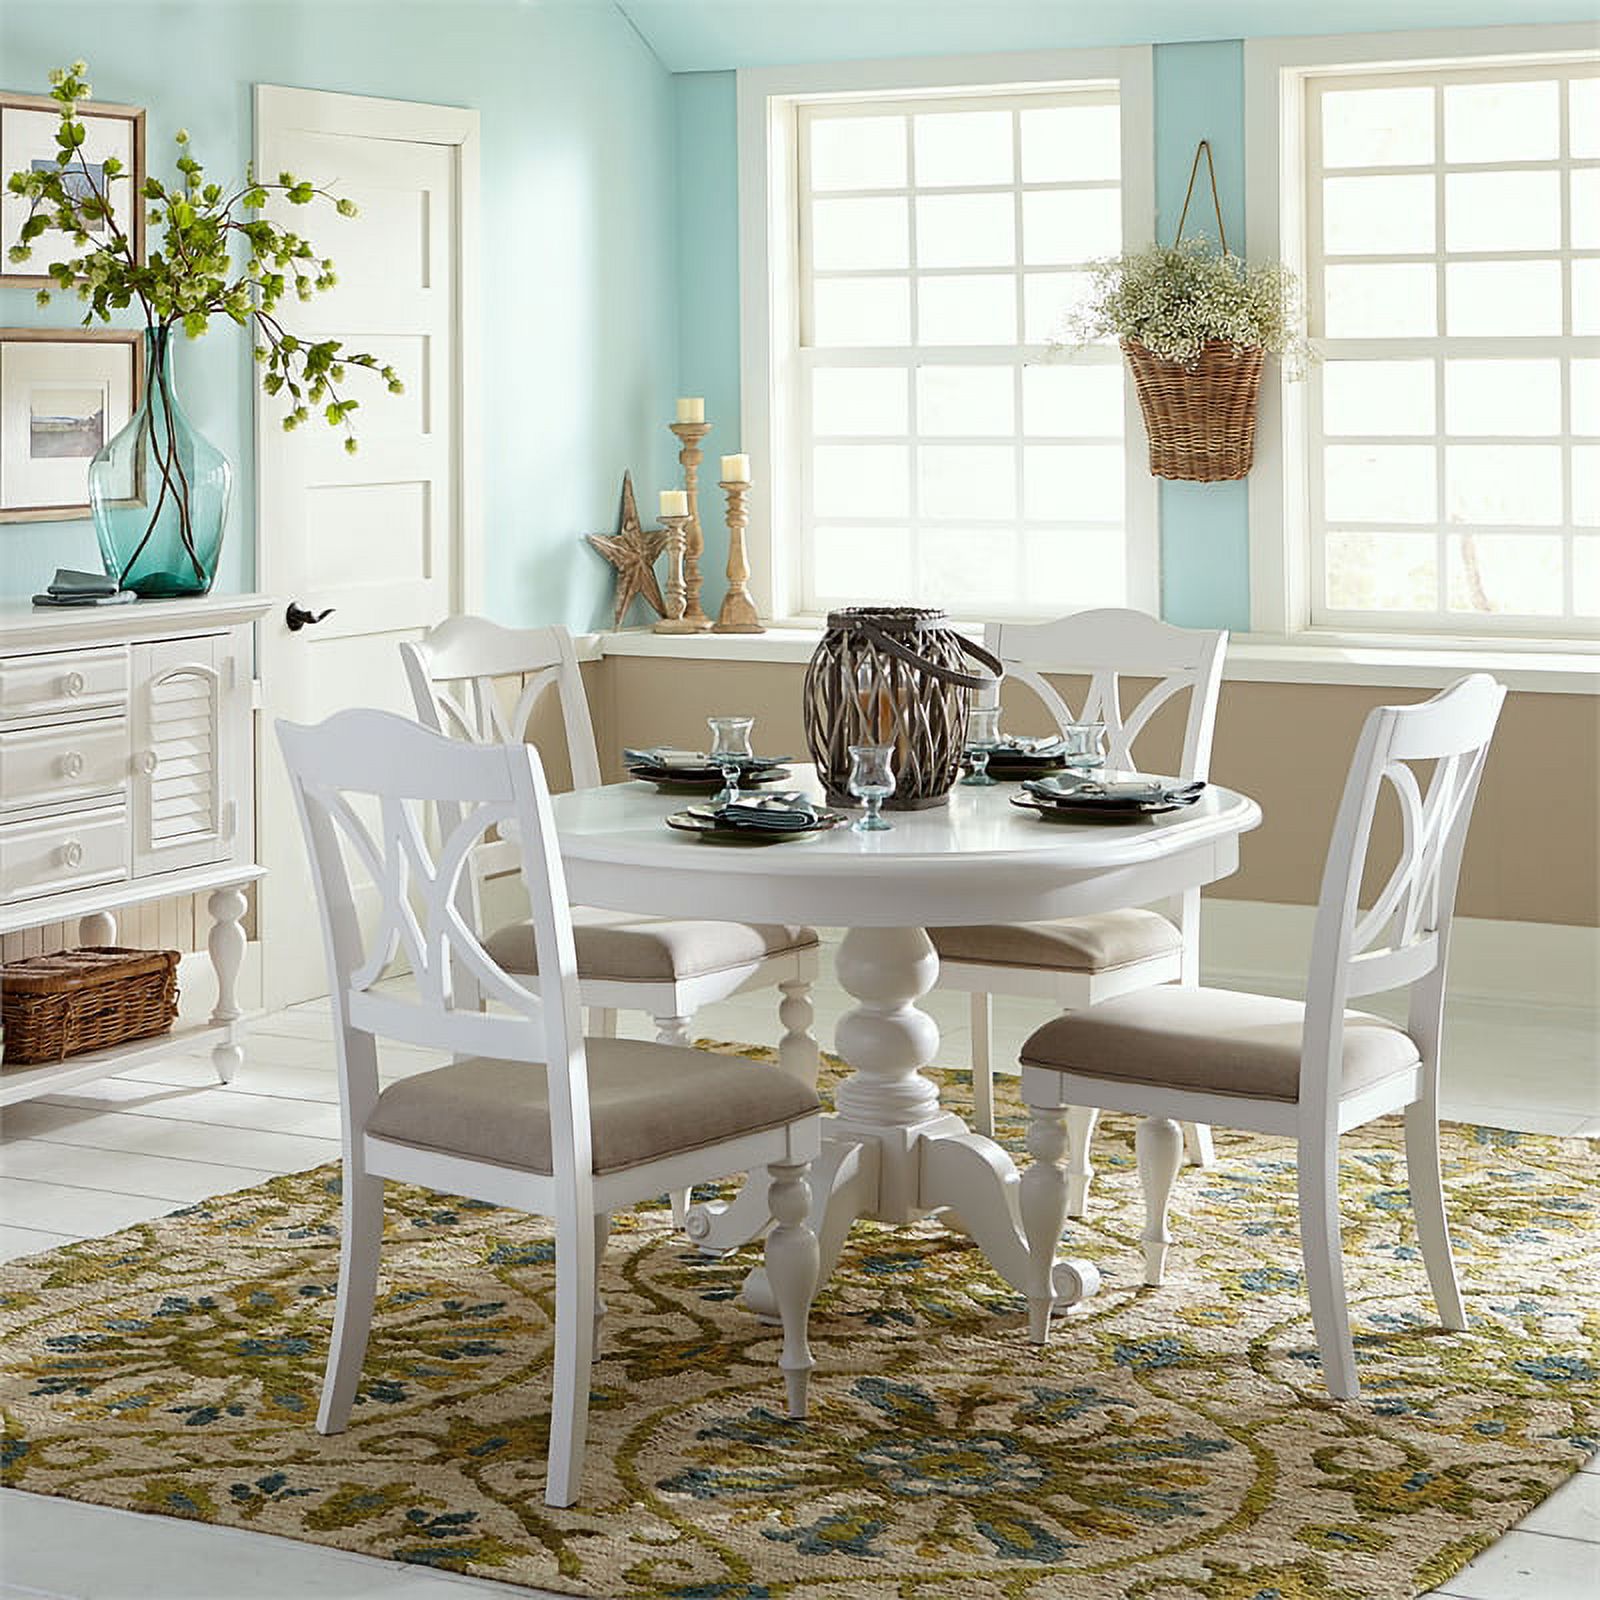 Summer House White 5 Piece Pedestal Table Set - image 1 of 14